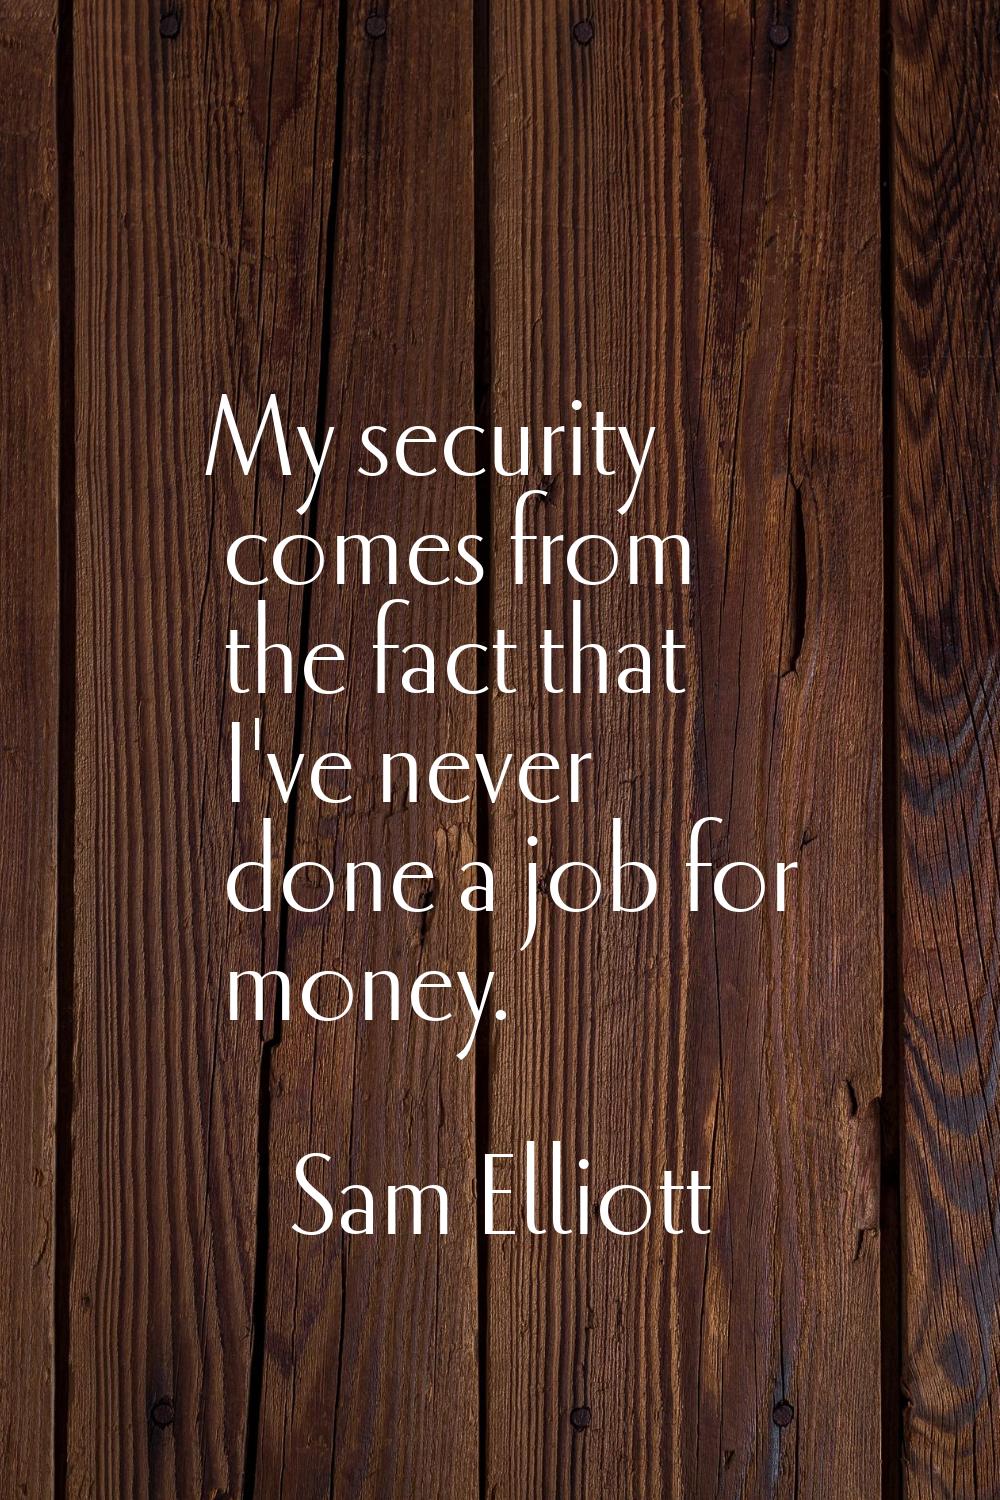 My security comes from the fact that I've never done a job for money.